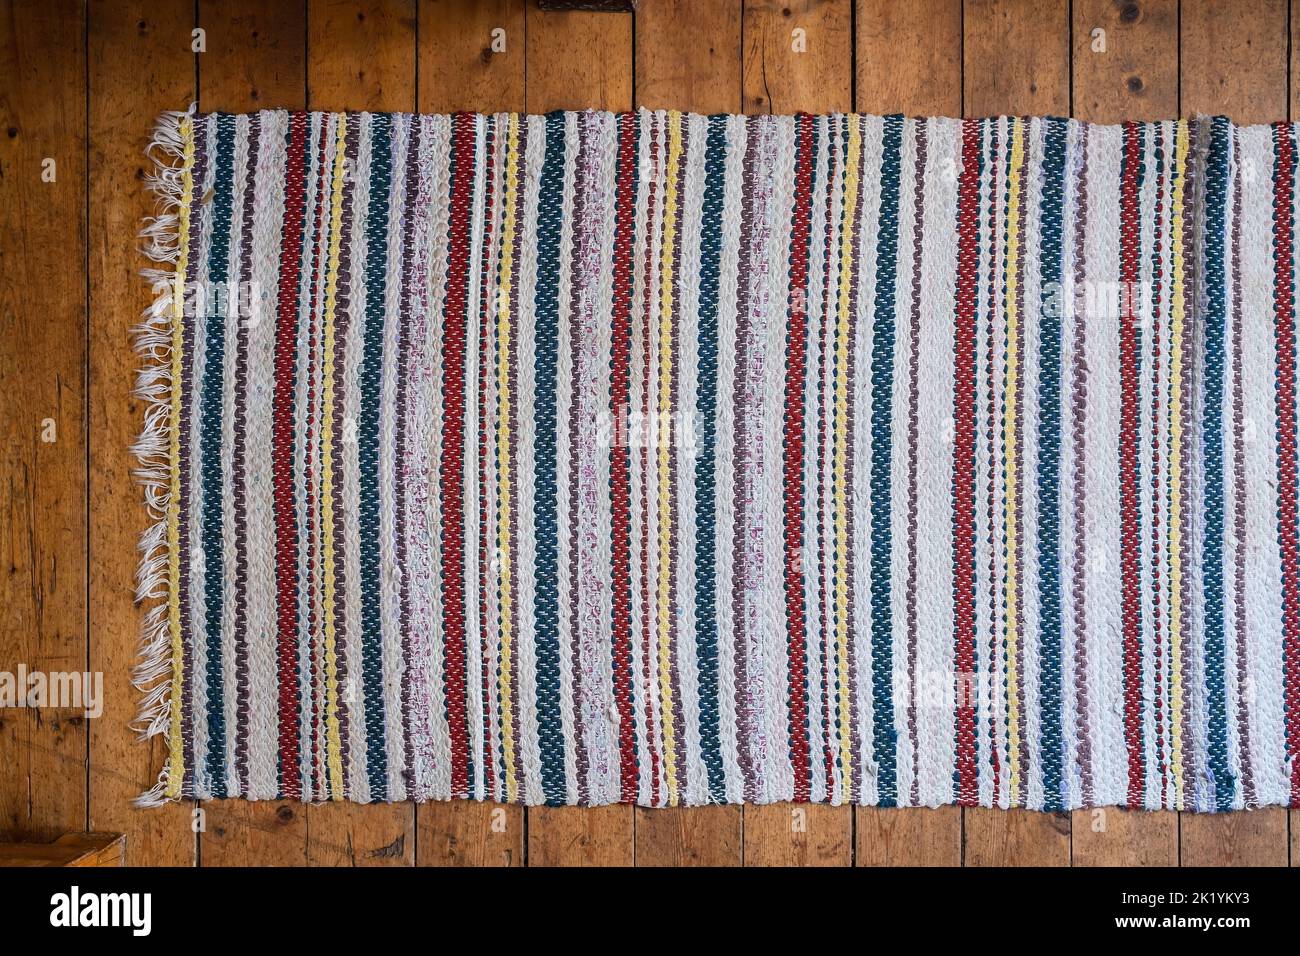 Carpet of multicolored fabrics on an old wooden floor, background textured image. Copy space. Top view. Close-up. Stock Photo